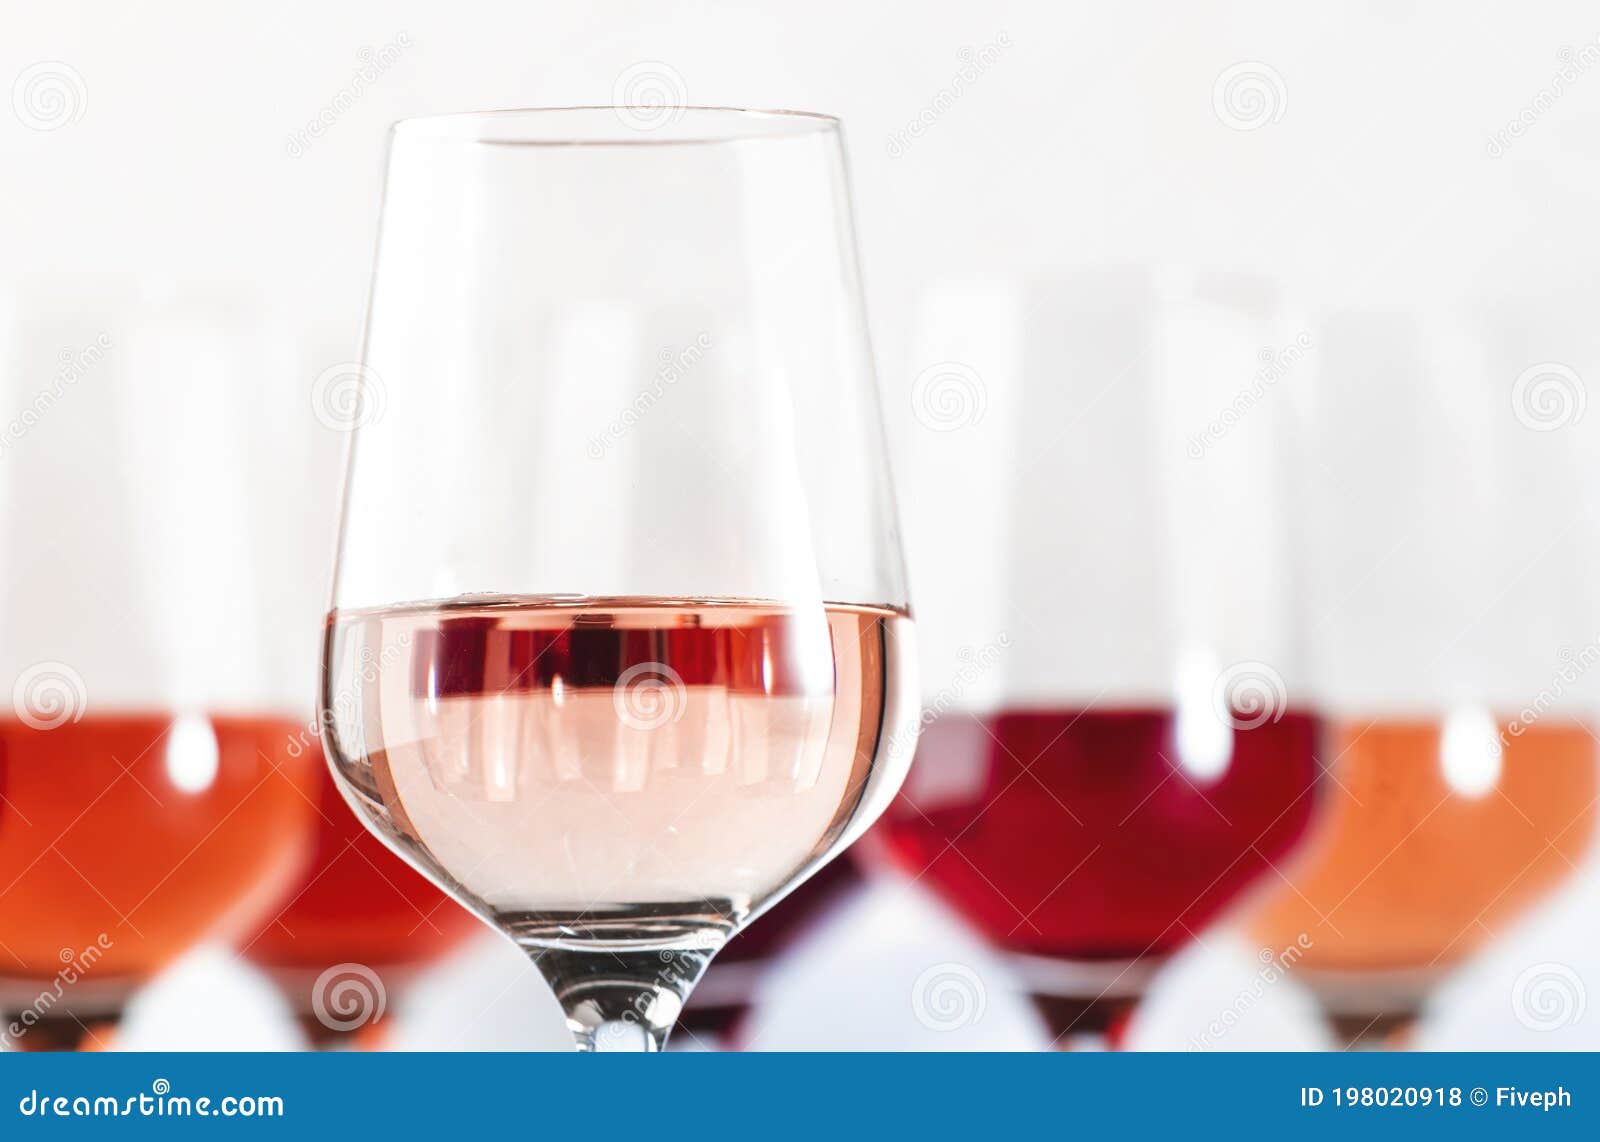 rose wine glasses set on wine tasting. tasting different varieties, colors and shades of pink wine concept. white background